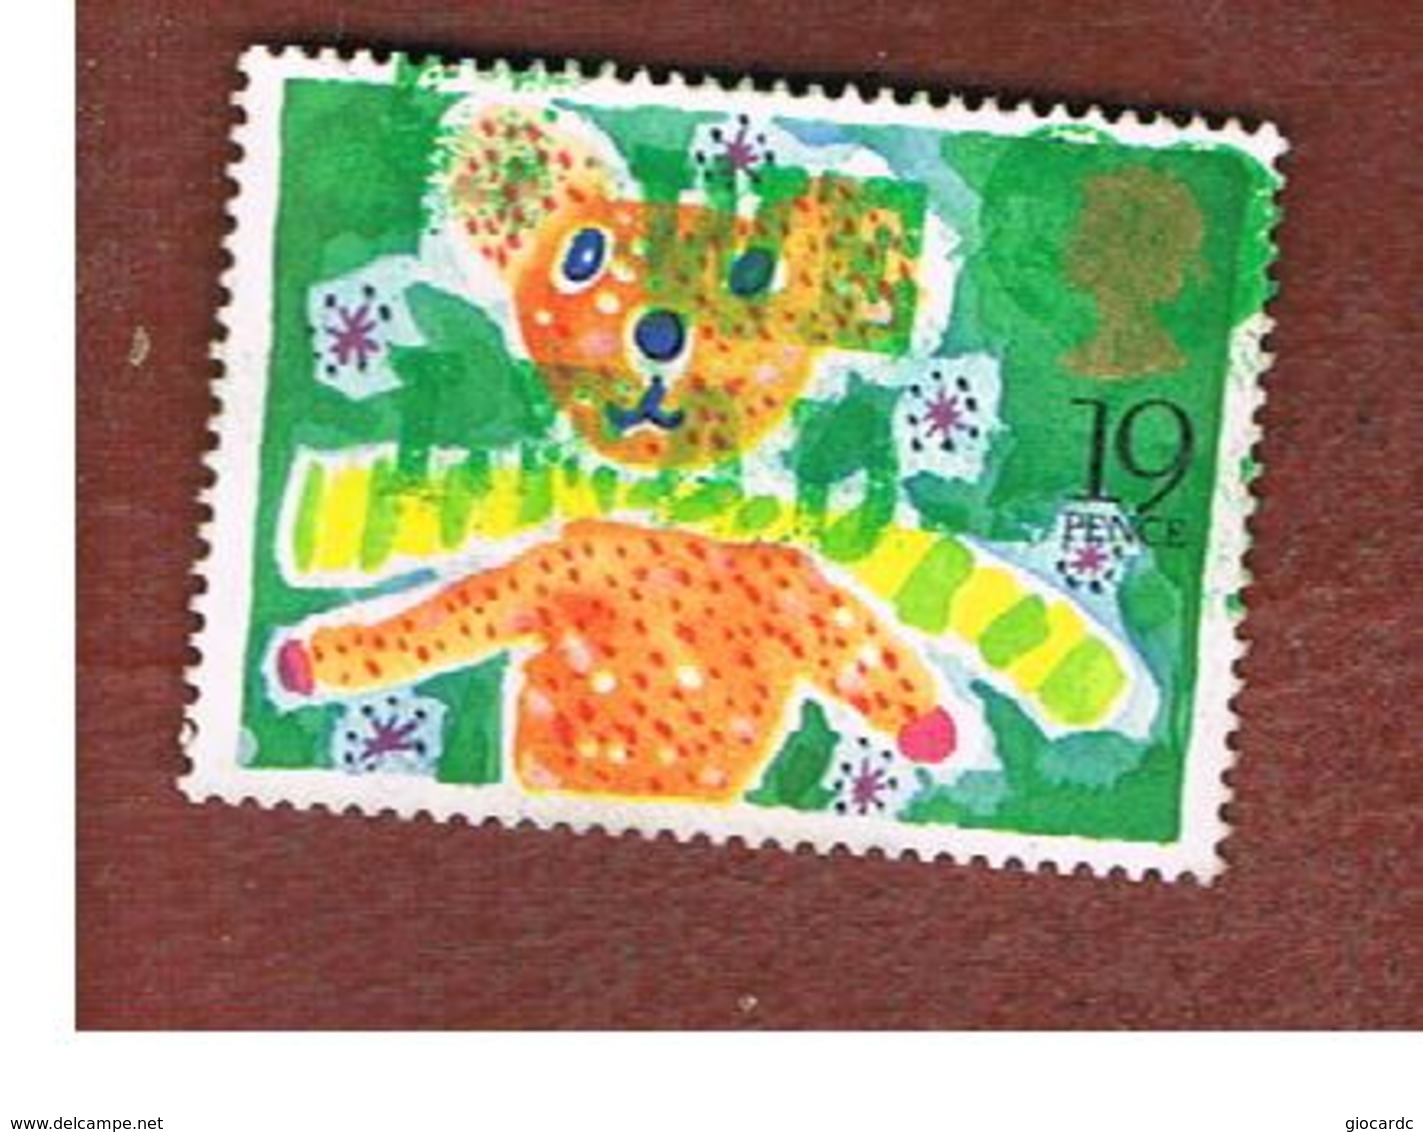 GRAN BRETAGNA (GREAT BRITAIN) - SG 1427 -  1989  GREETINGS STAMPS: TEDDY BEAR  (FROM BOOKLET)  - USED - Usati